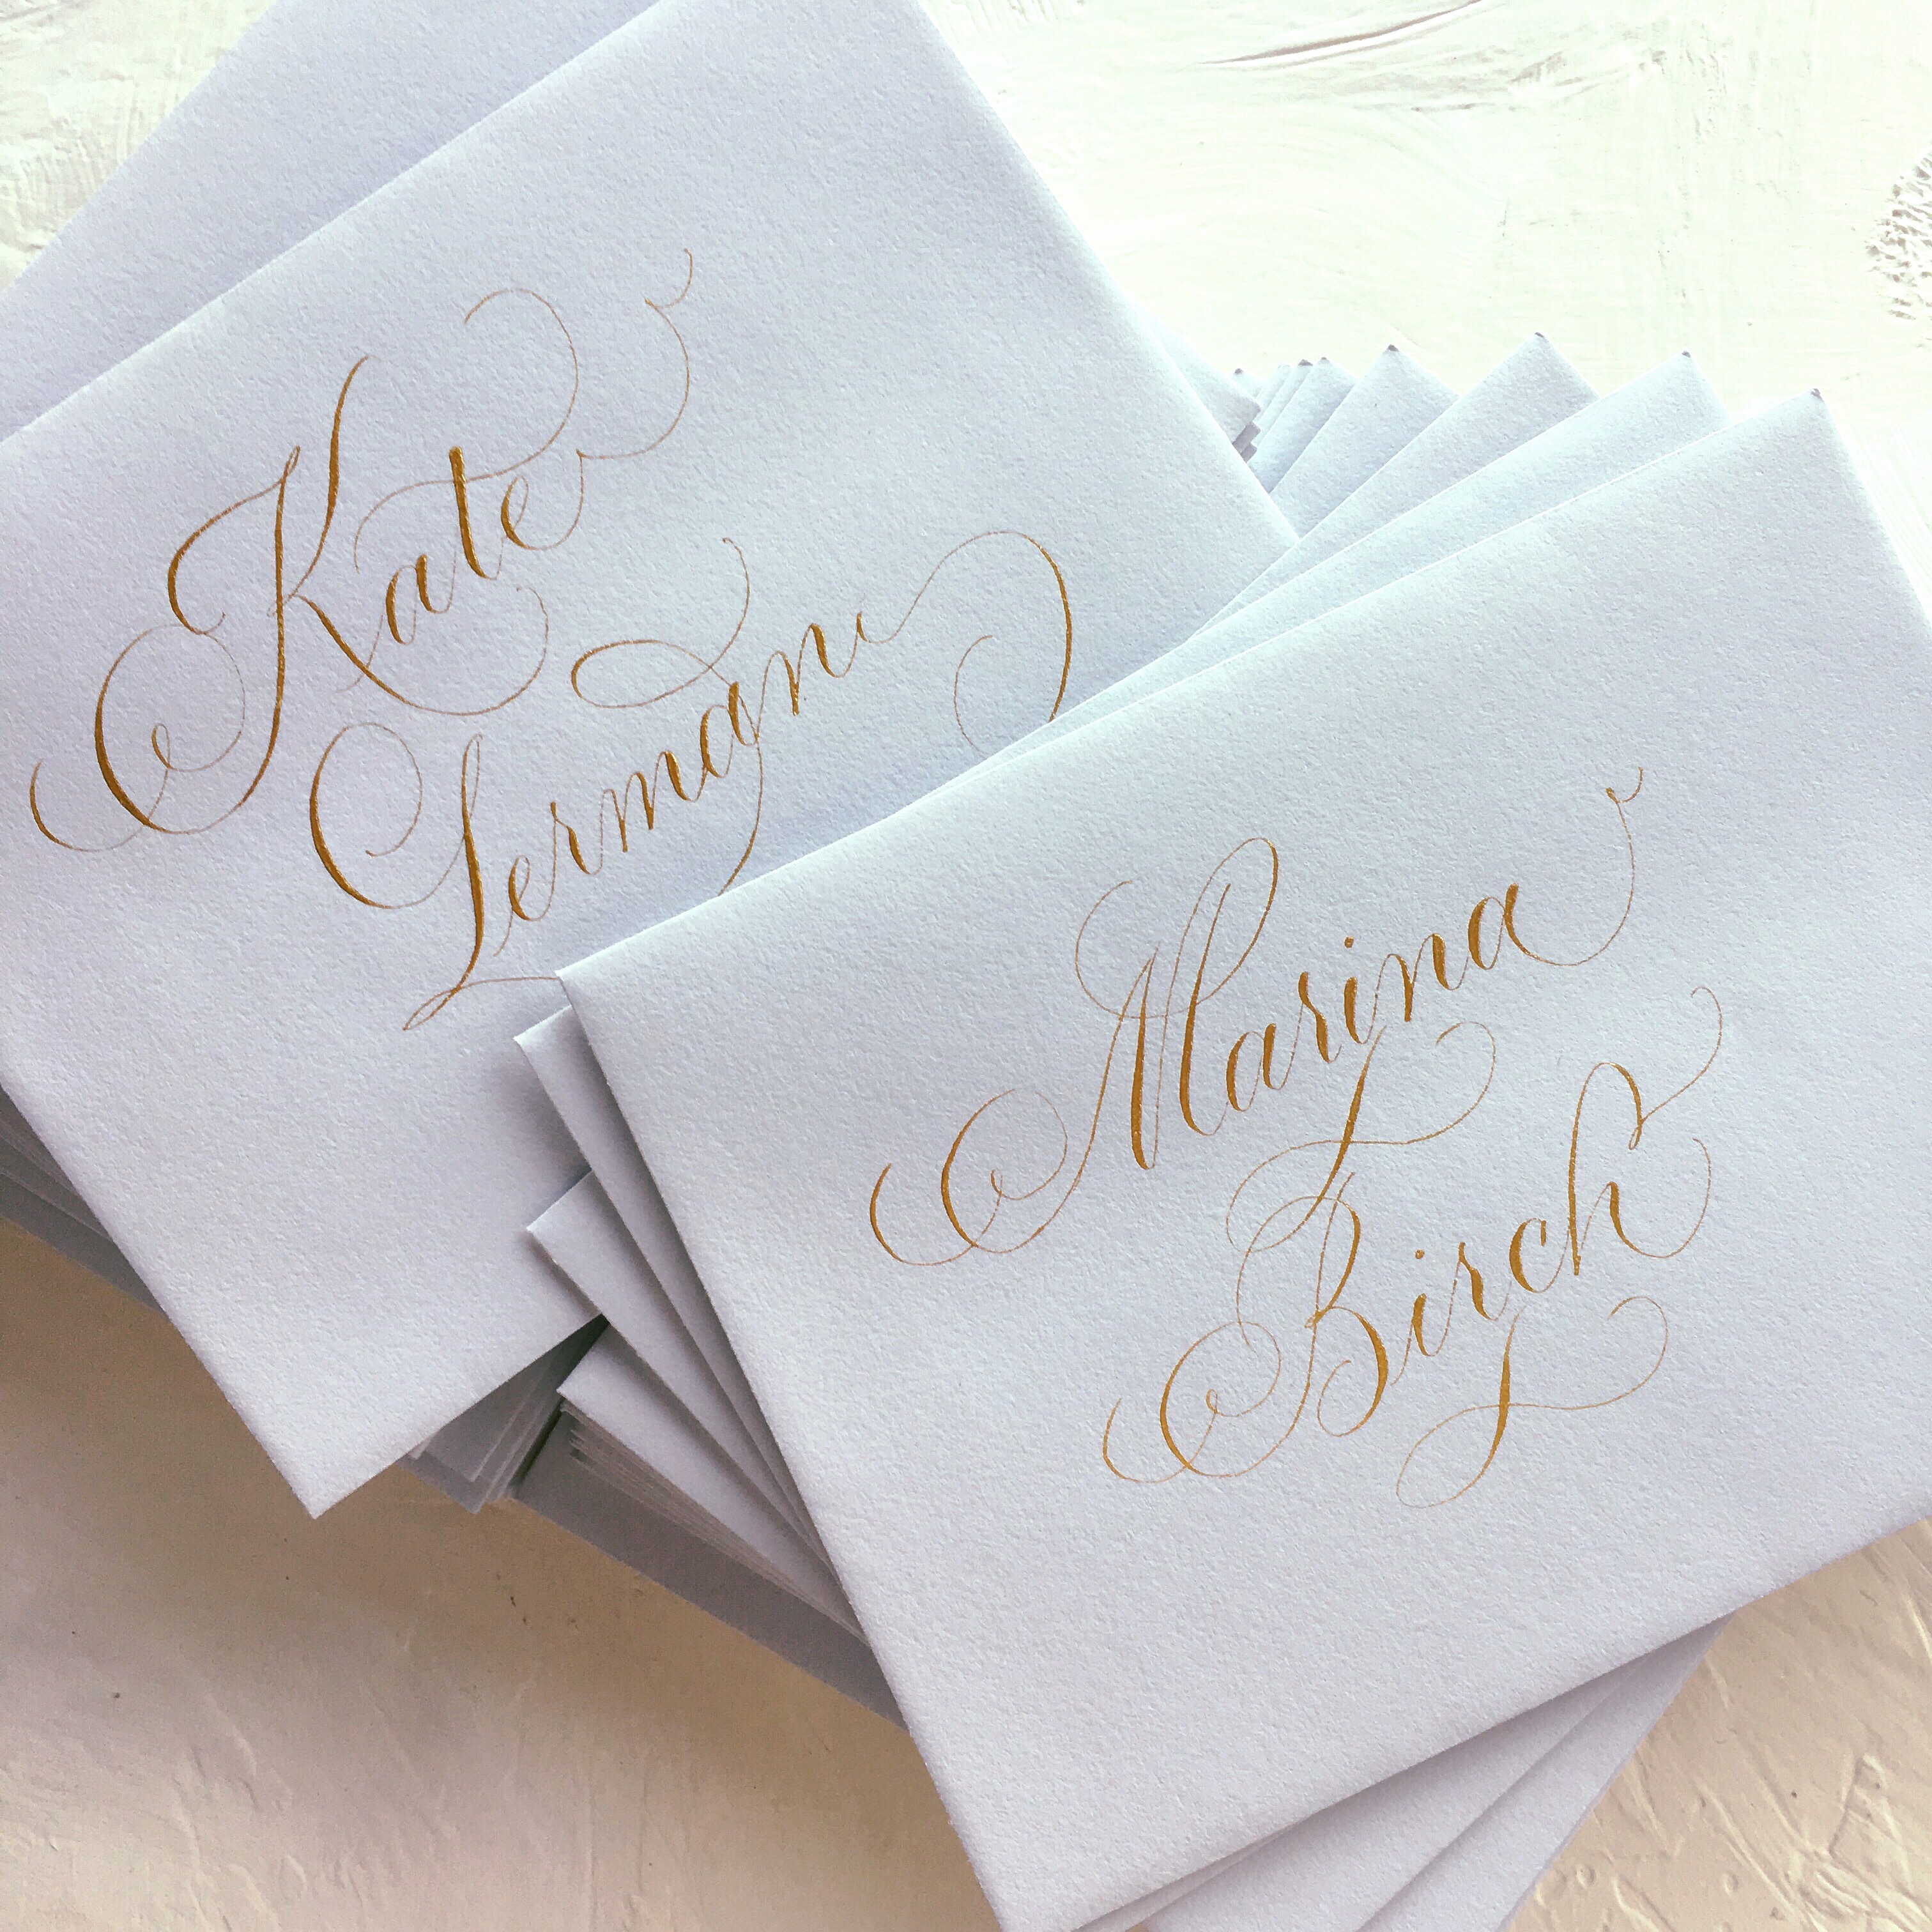 Gray Envelopes with Gold Calligraphy / Bien Fait Calligraphy